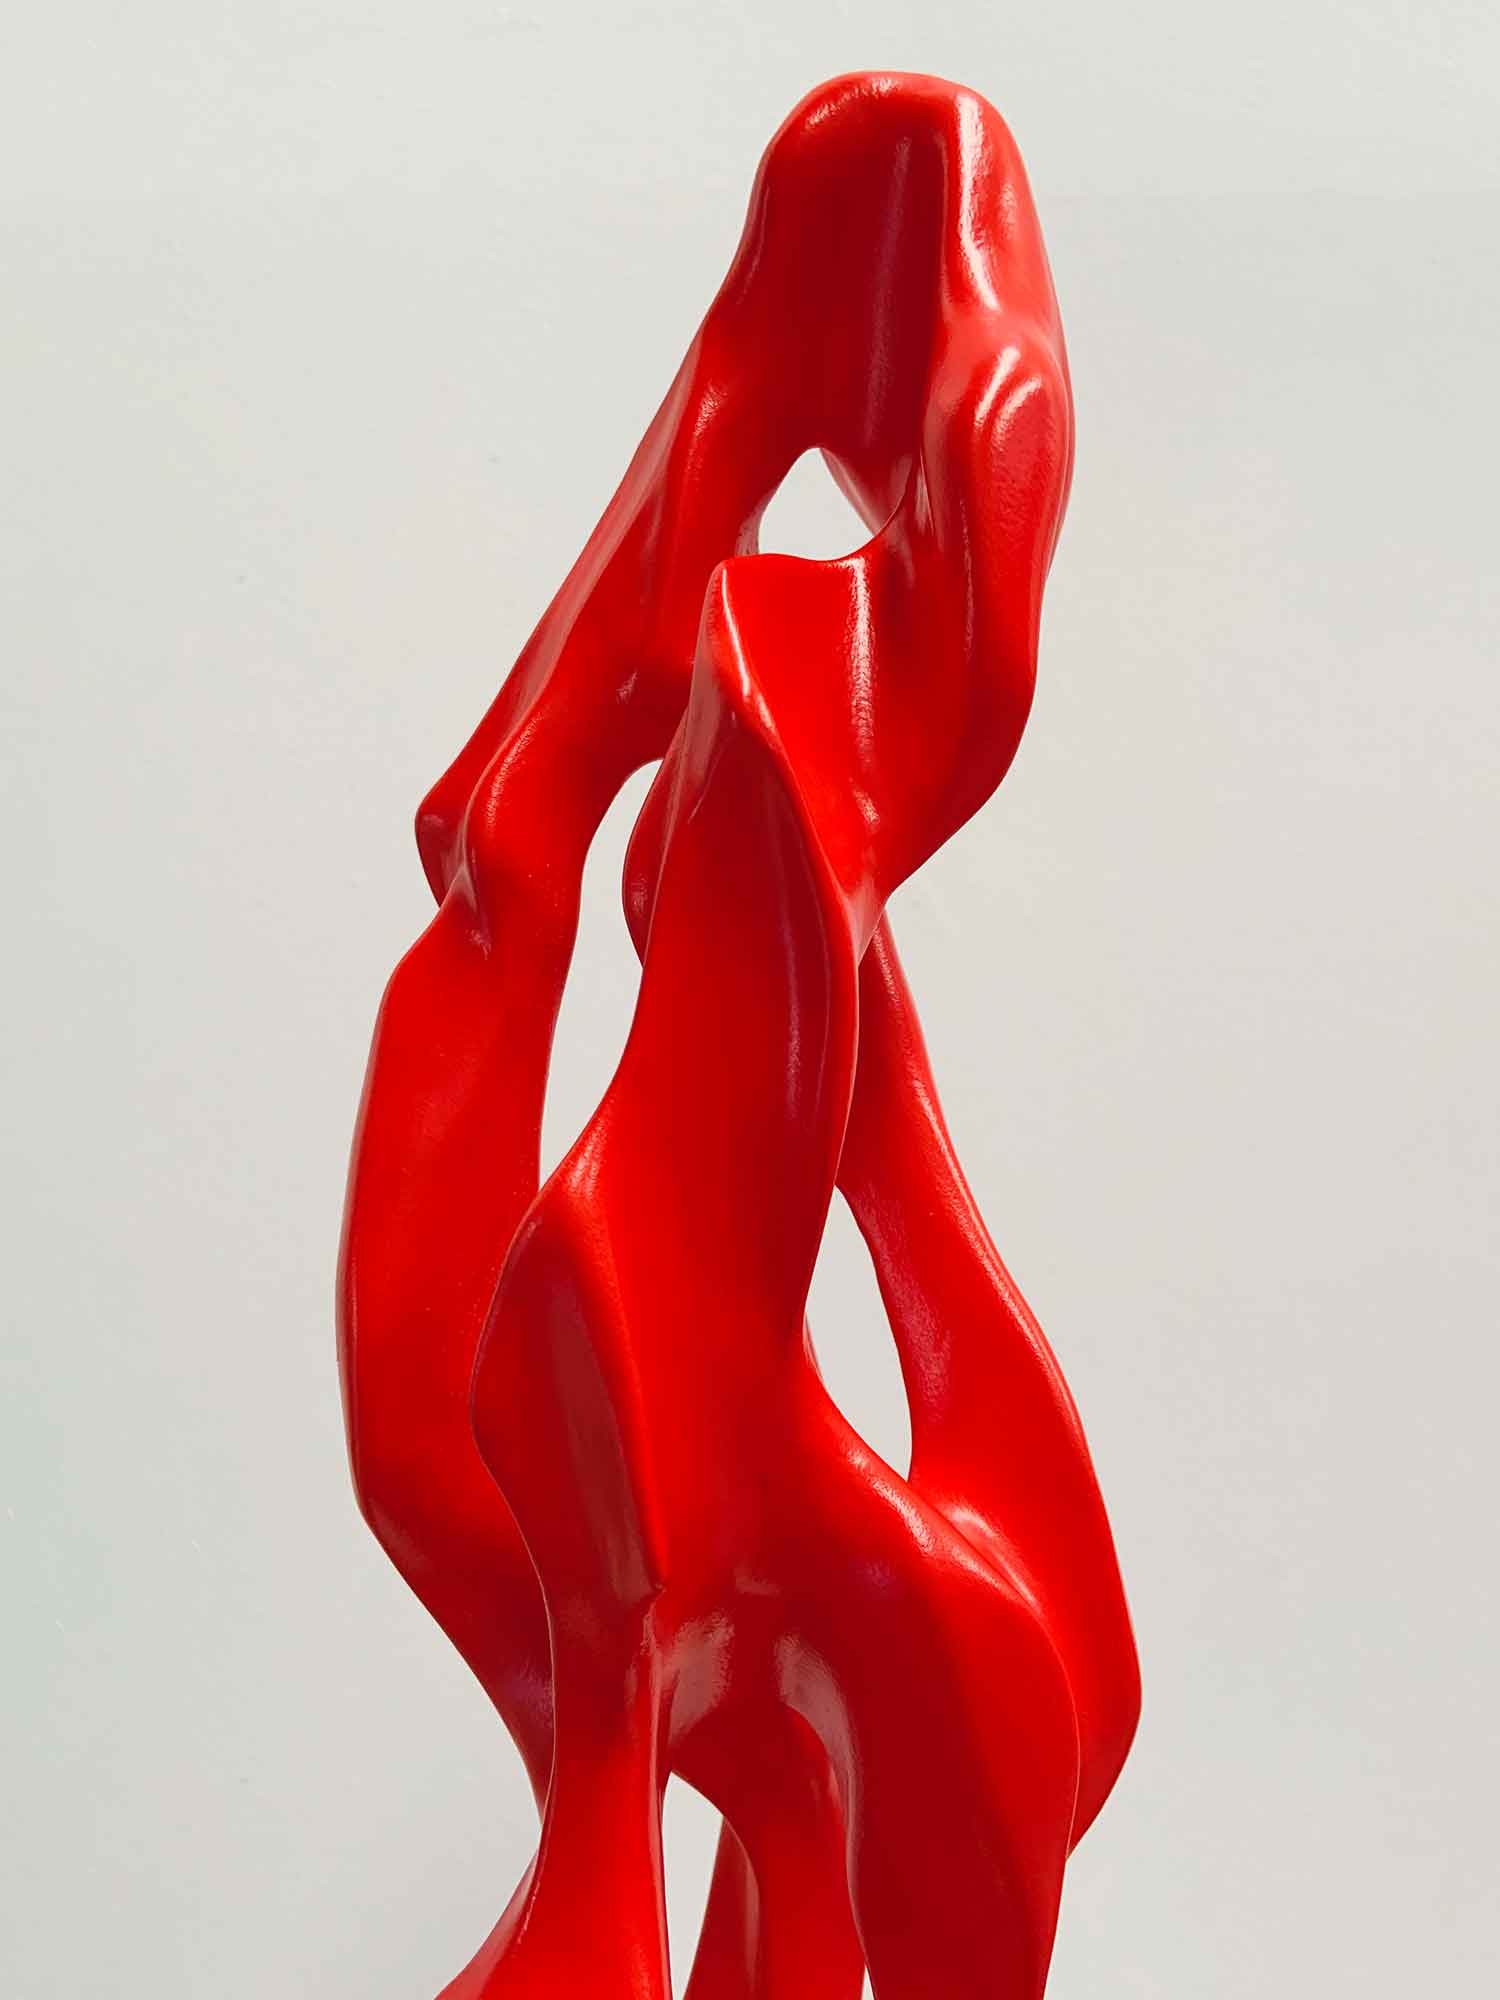 Red sculpture of organic shapes